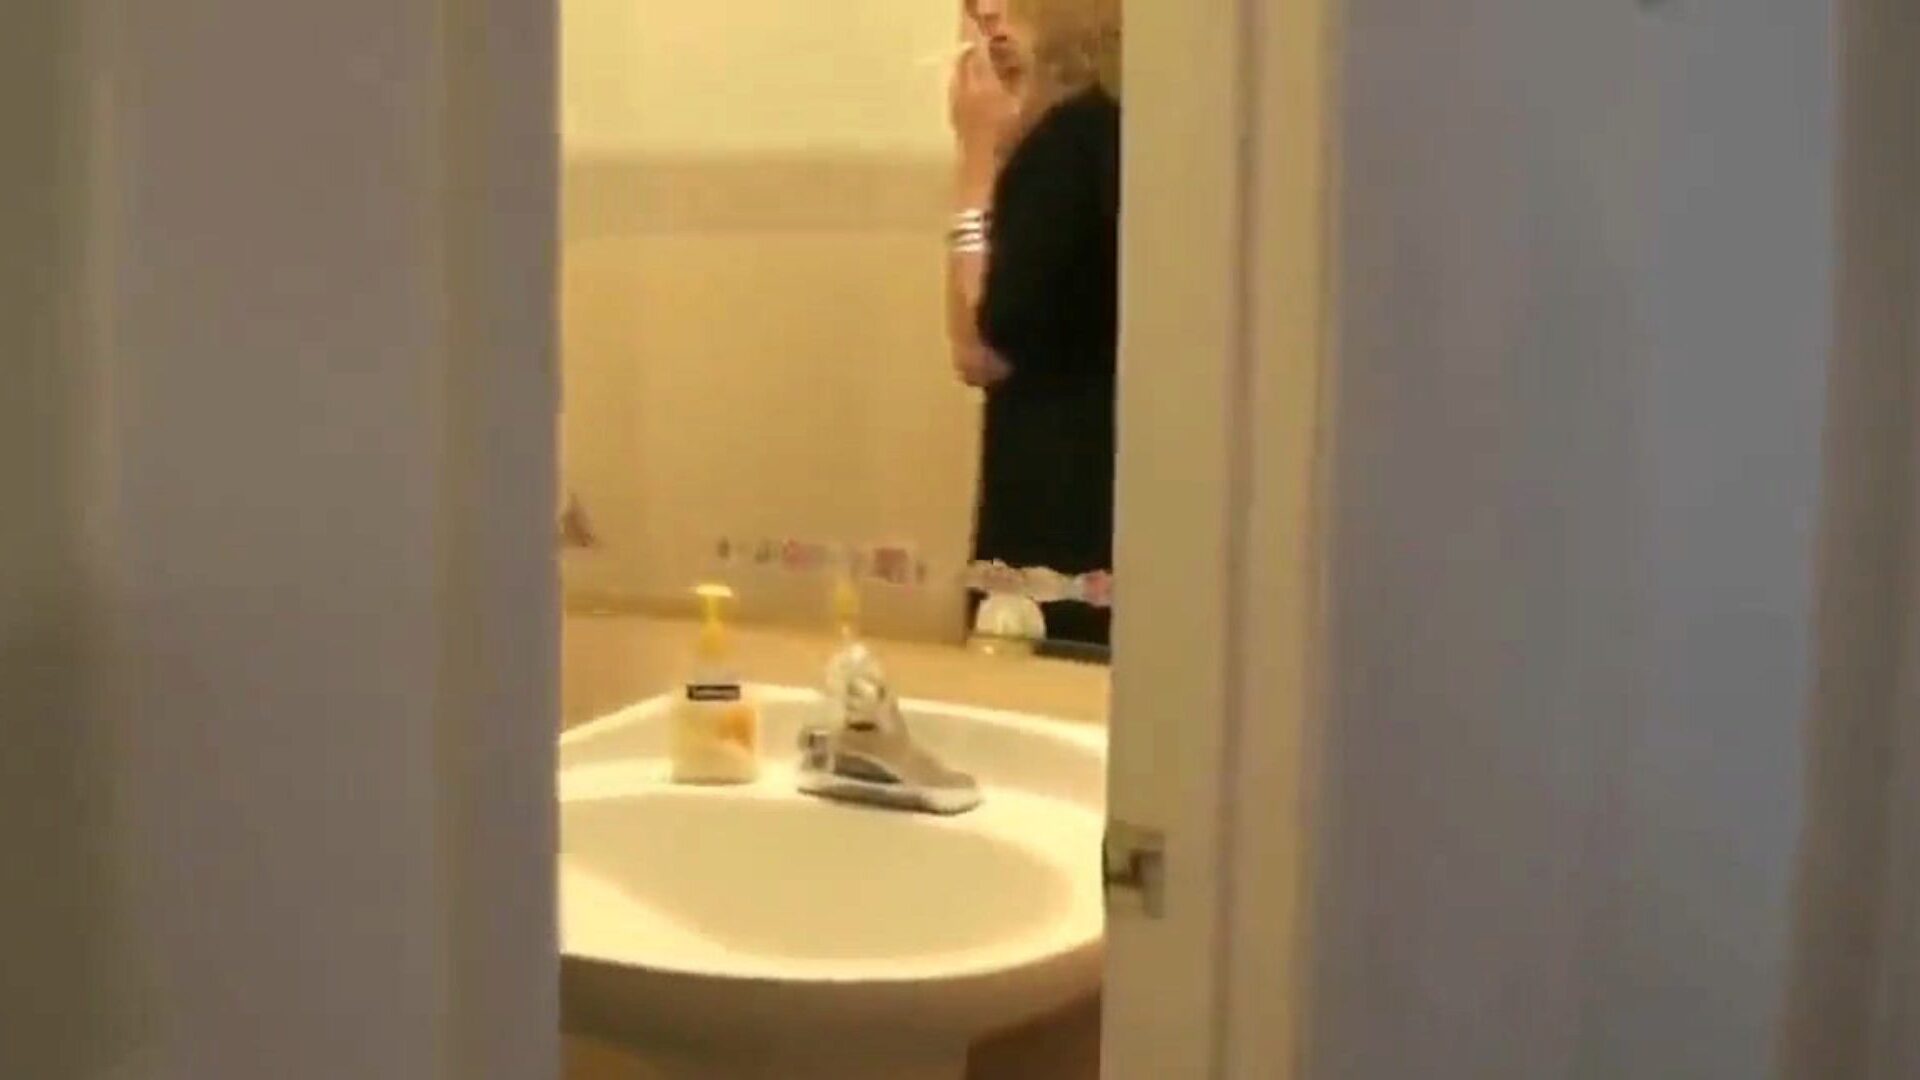 Smoking Mom Catches Son Spying on Her in Bathroom... Watch Smoking Mom Catches Son Spying on Her in Bathroom Roleplay episode on xHamster - the ultimate bevy of free Xxx Mom Free & Free Mobile Mom HD pornography tube clips